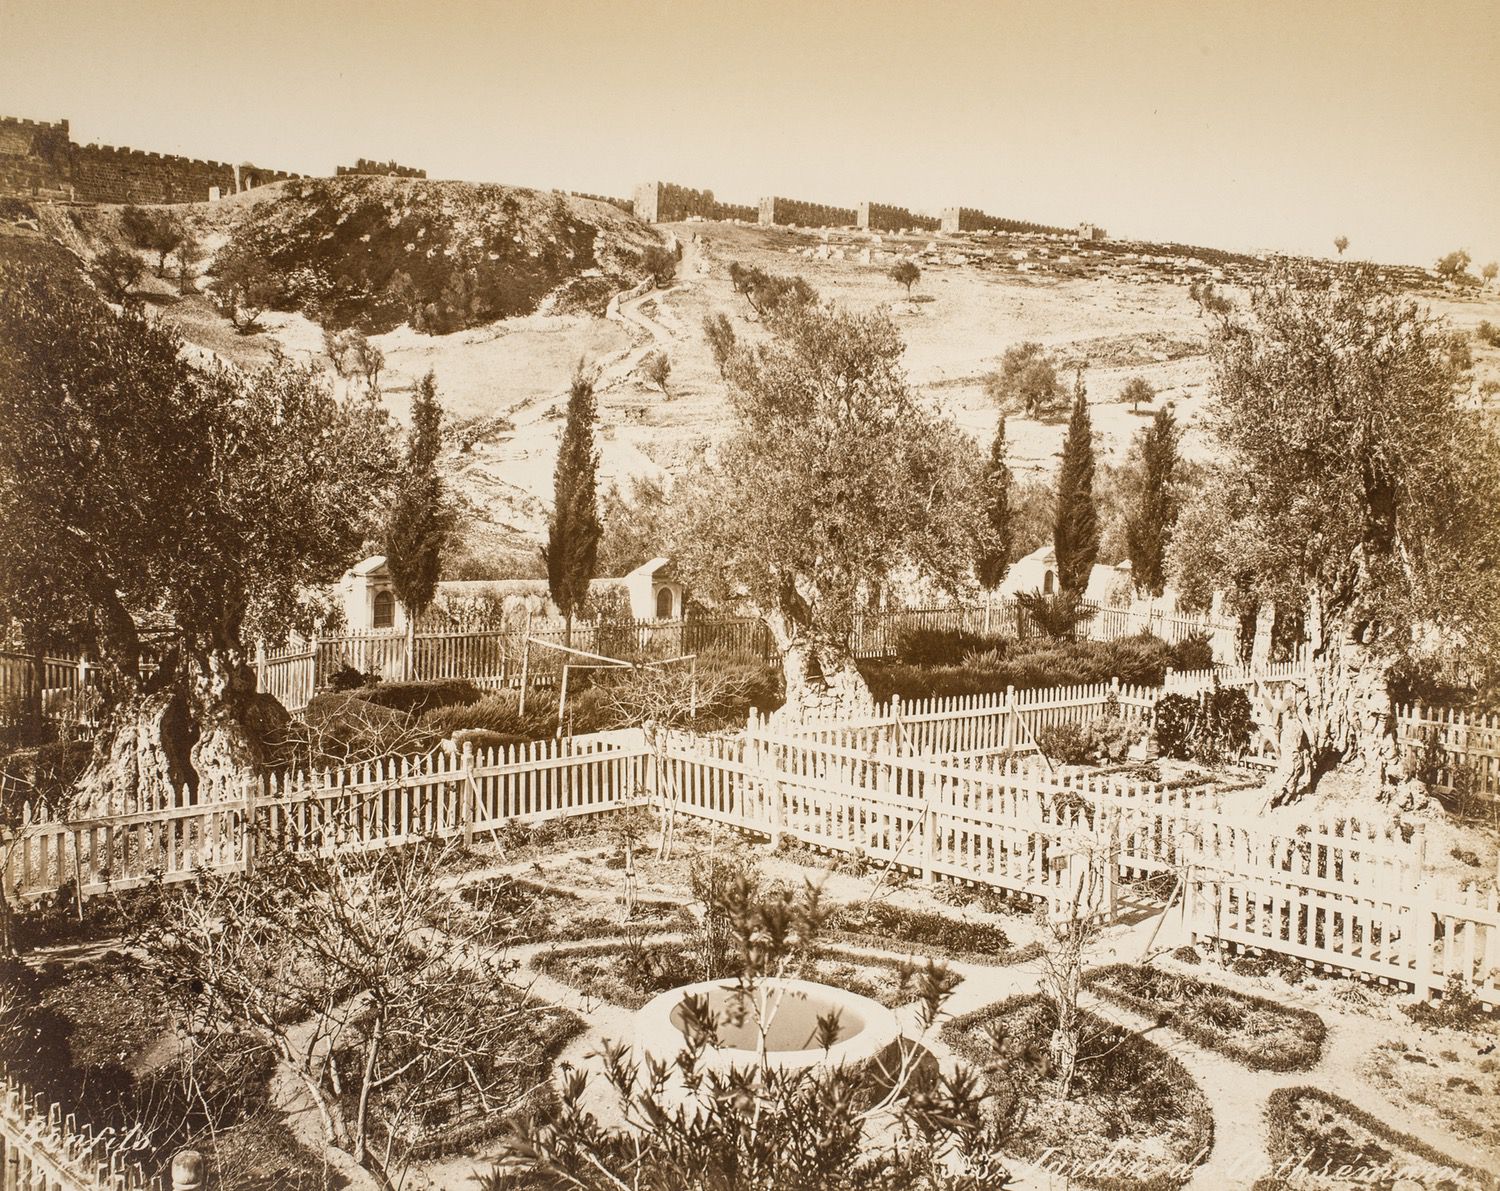 View over the Garden of Gethsemane  to the mount